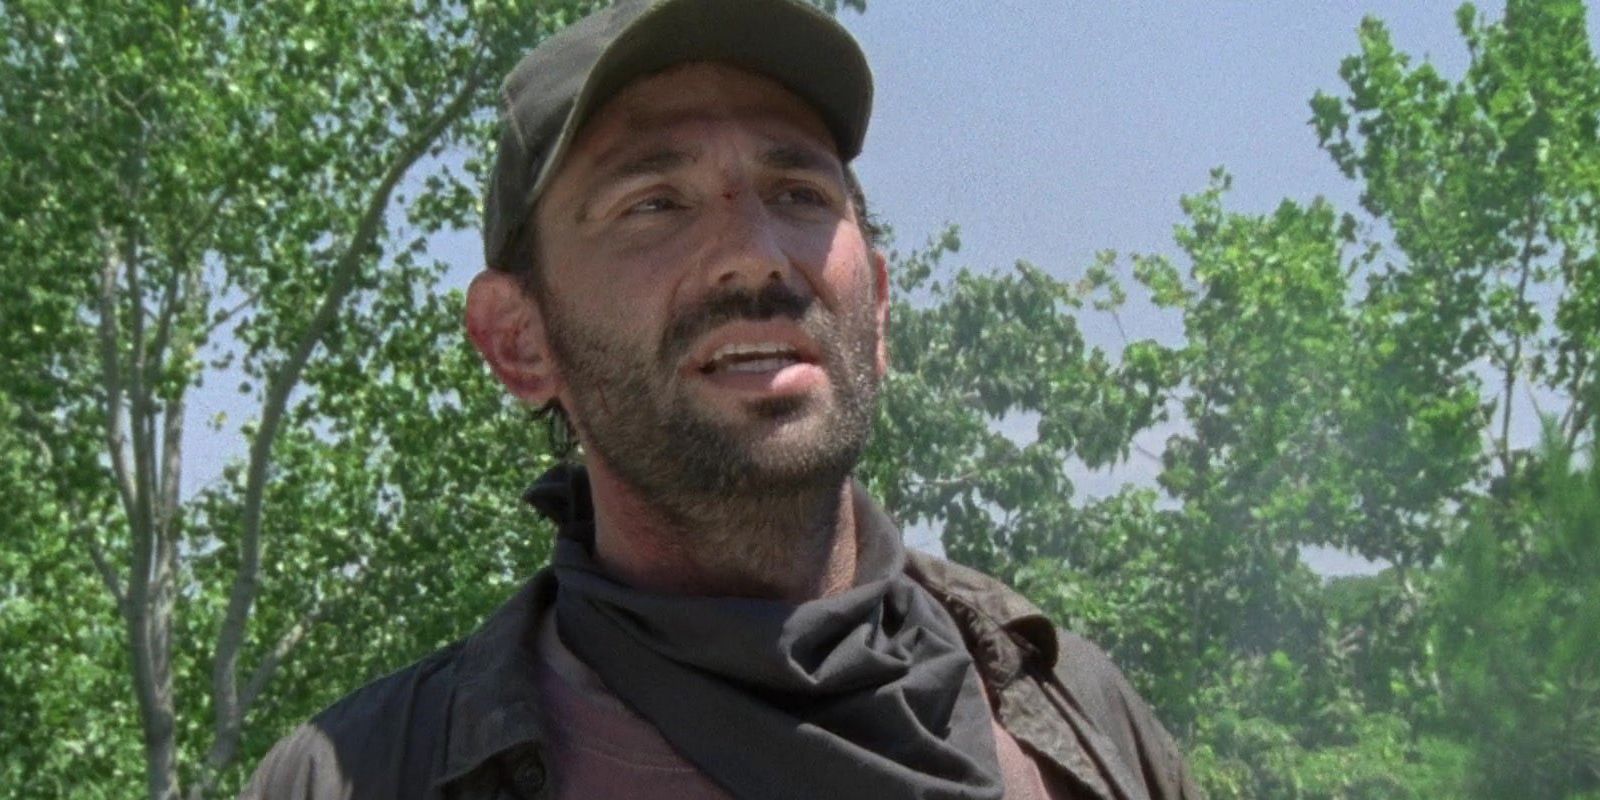 10 Most Noble Deaths In The Walking Dead, According To Reddit